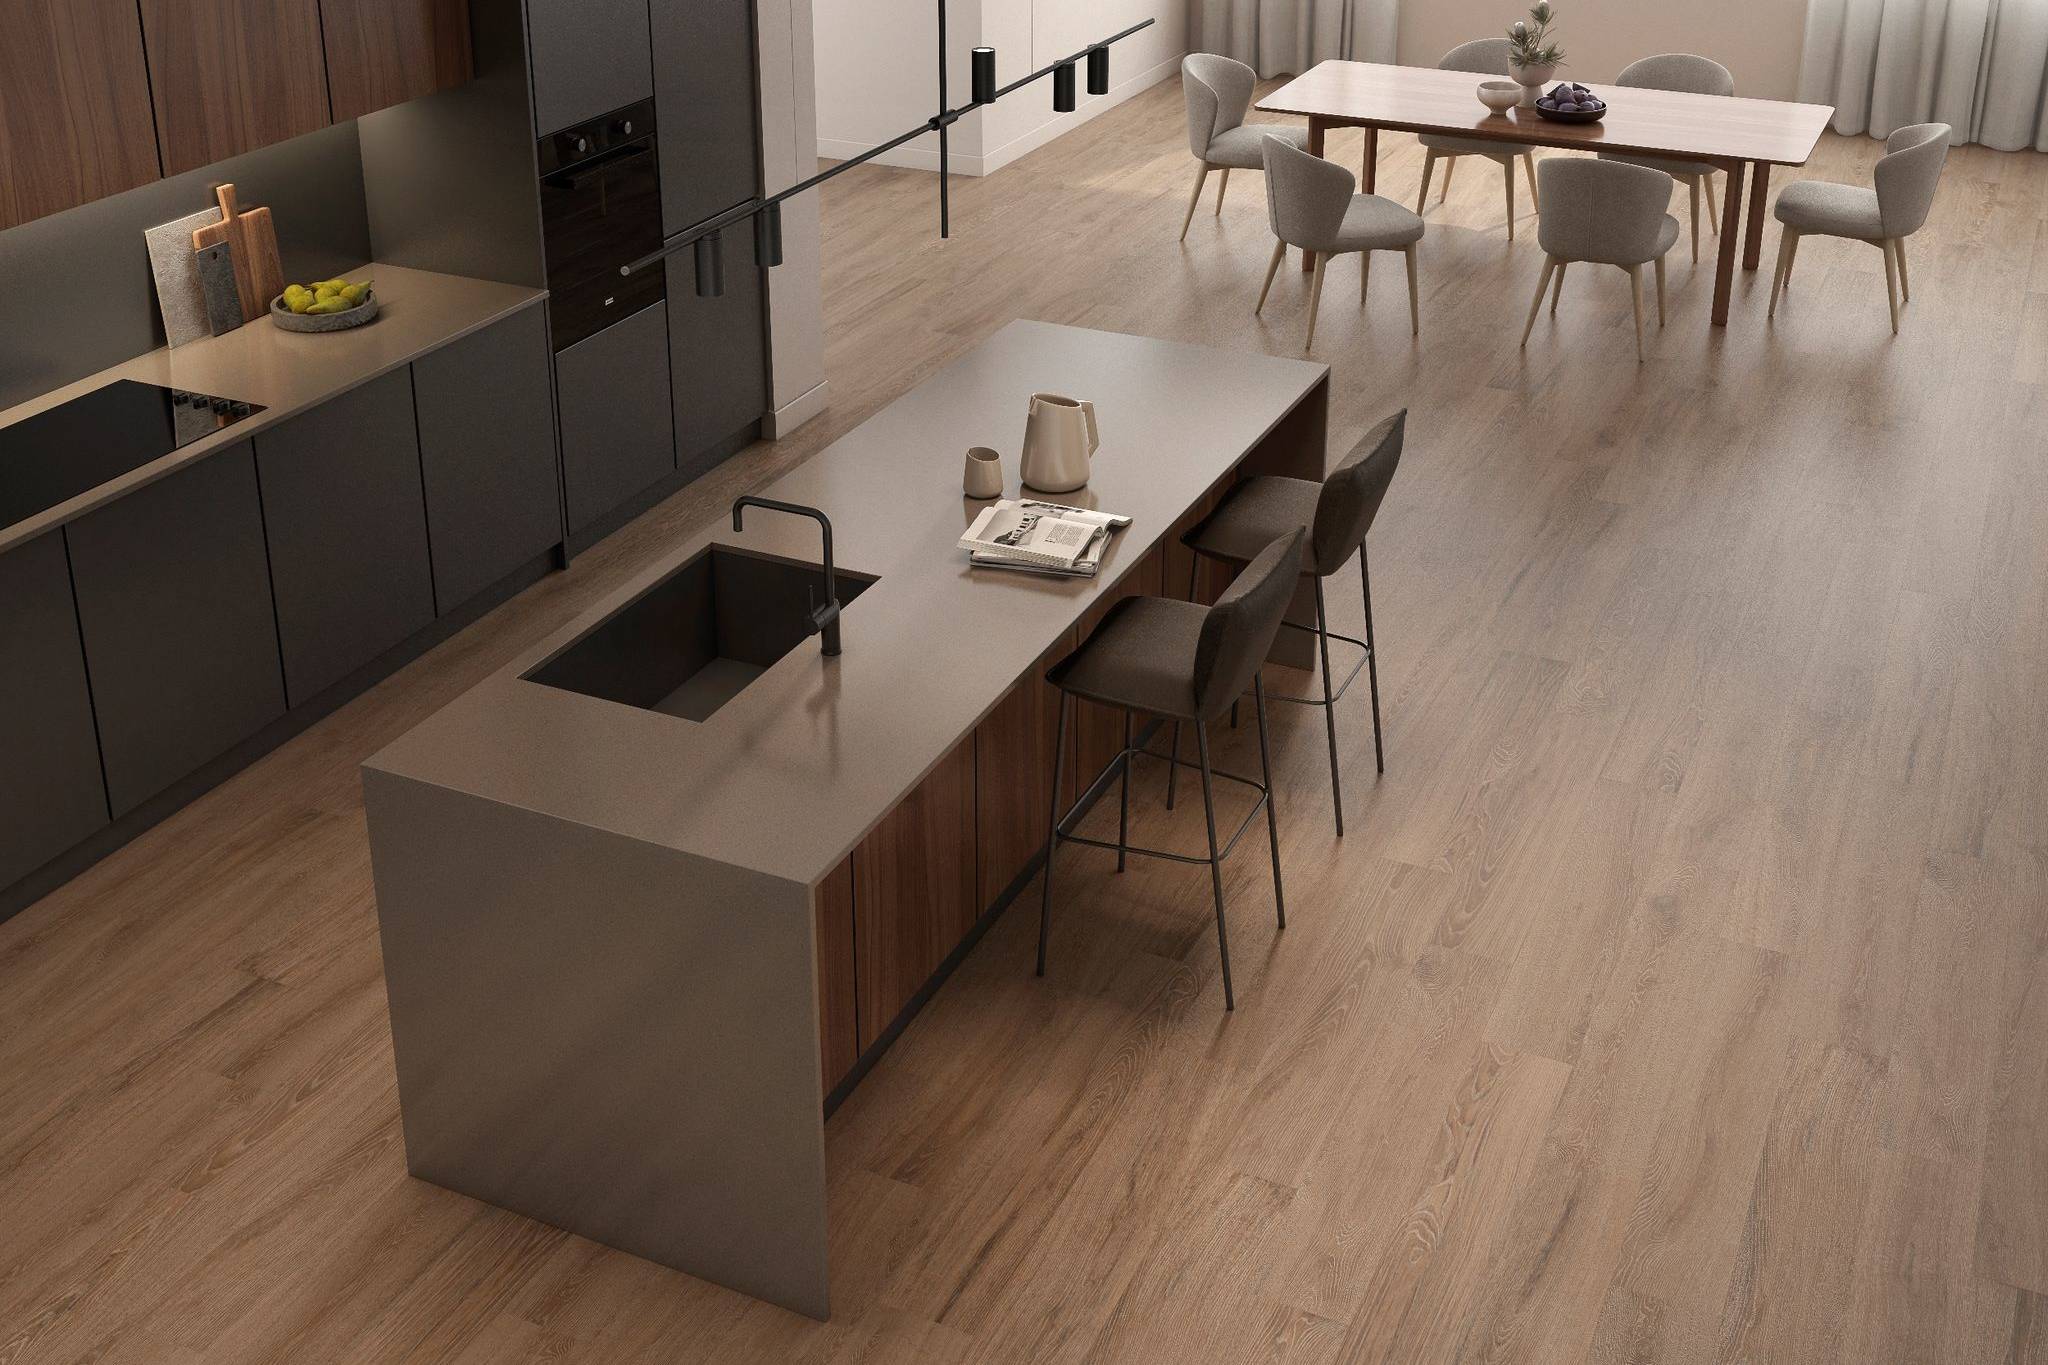 Woodlands 8X48 Nogal | Qualis Ceramica | Luxury Tile and Vinyl at affordable prices